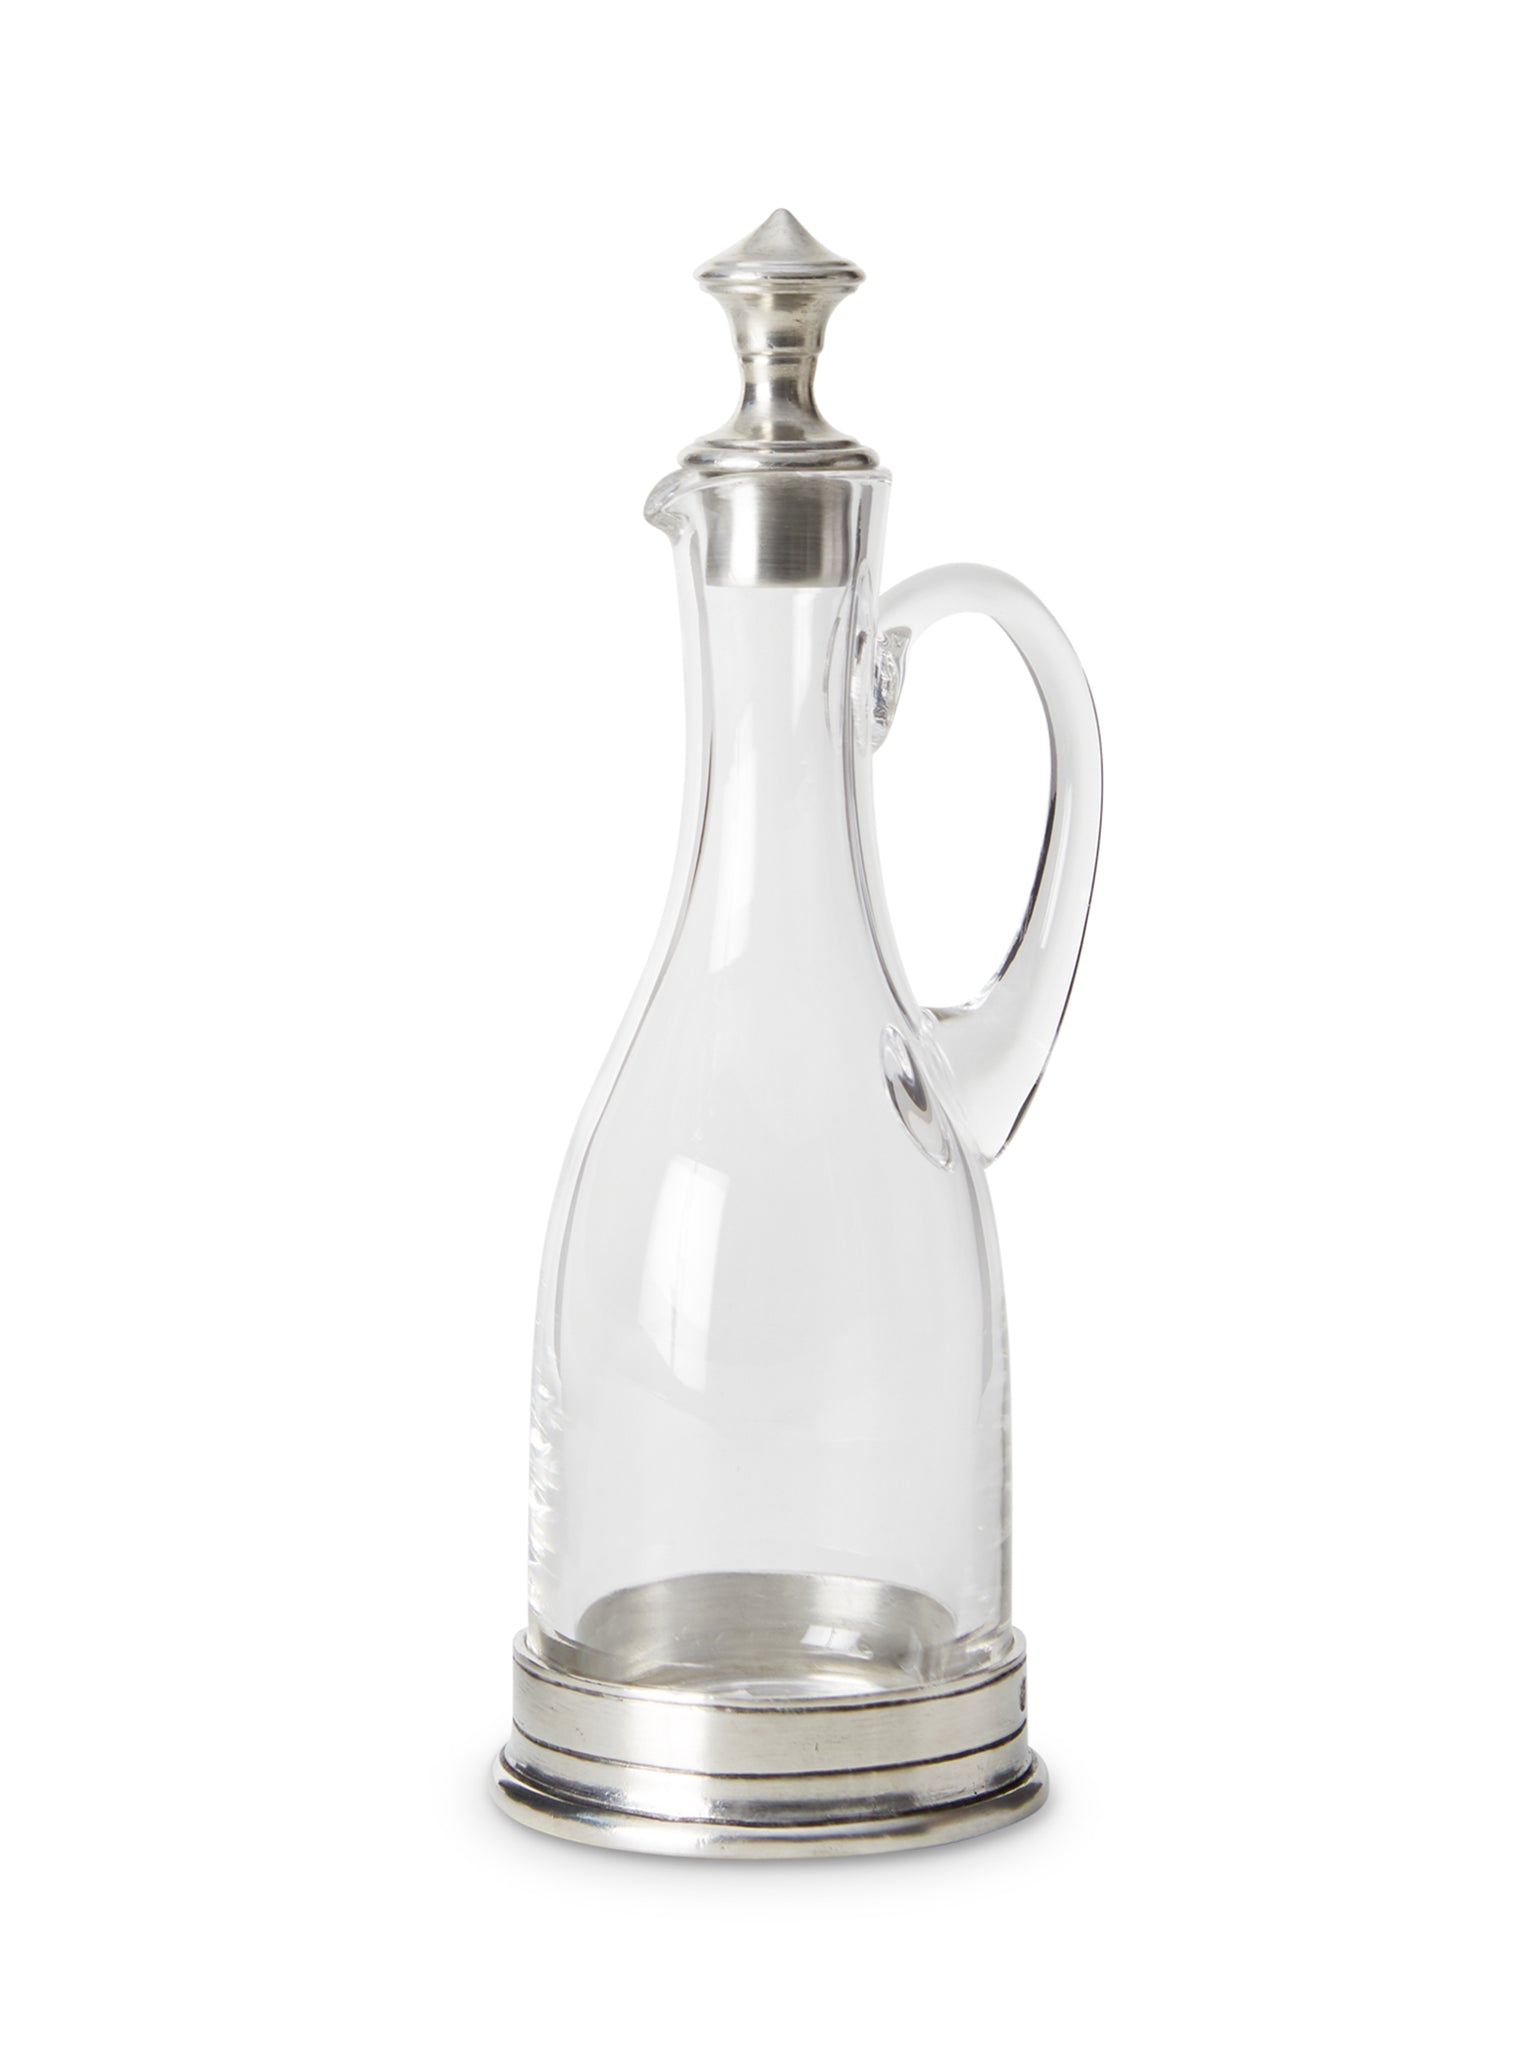 MATCH Pewter Cruet with Handle Weston Table